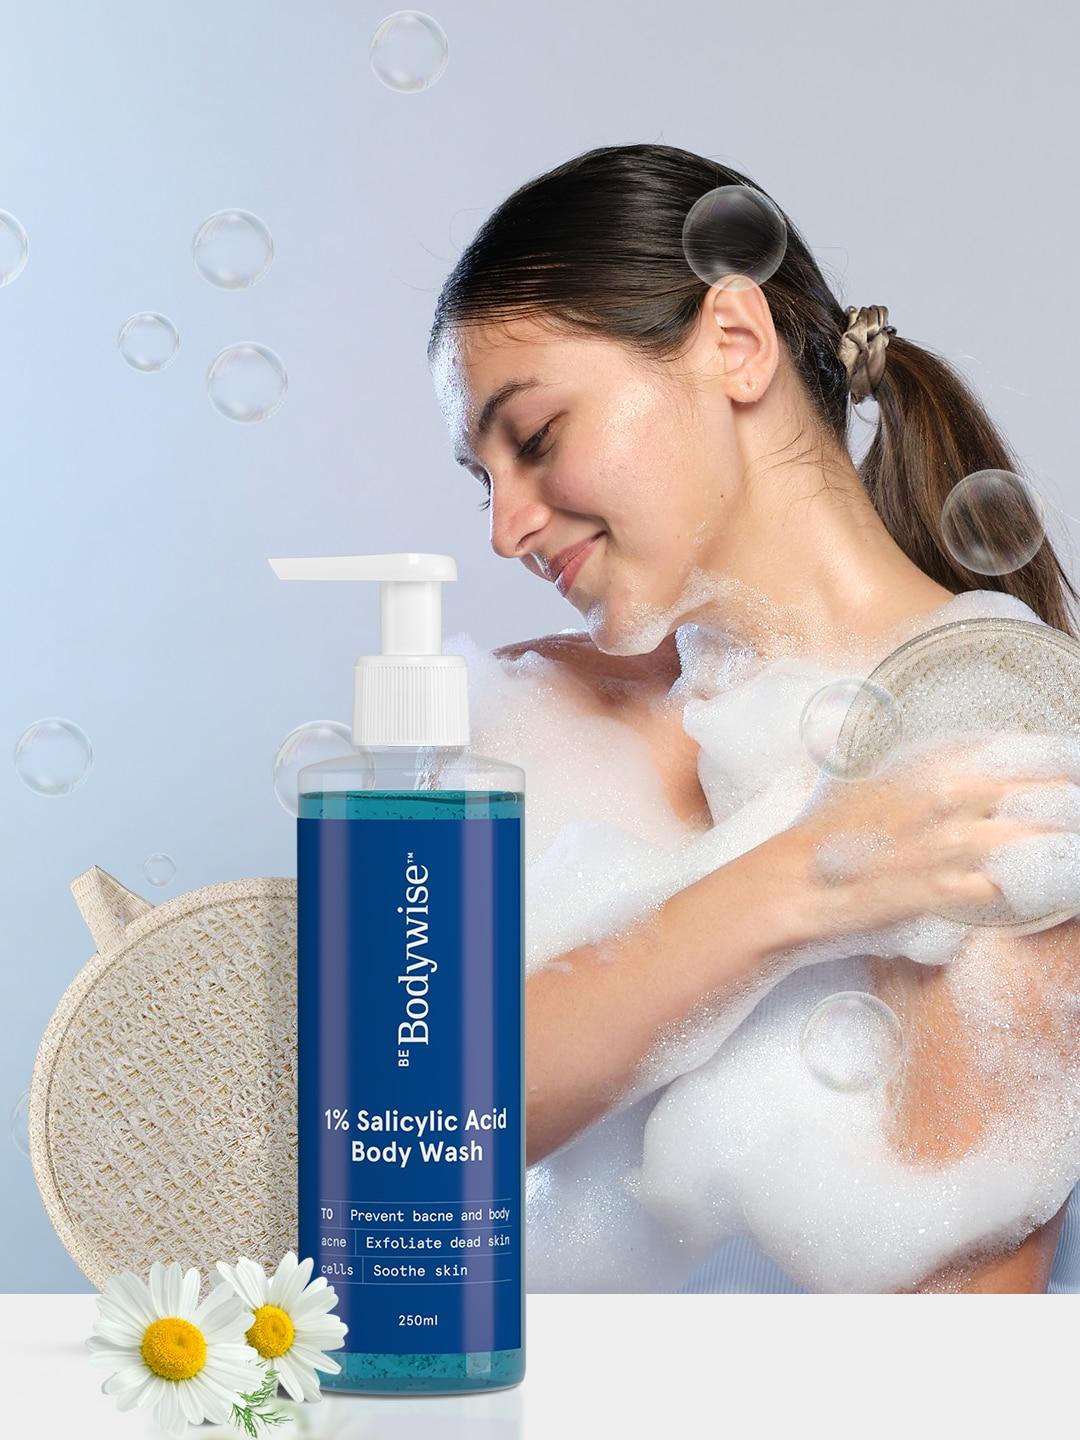 be-bodywise-1%-salicylic-acid-body-wash-250-ml-with-free-loofah-to-prevent-body-acne